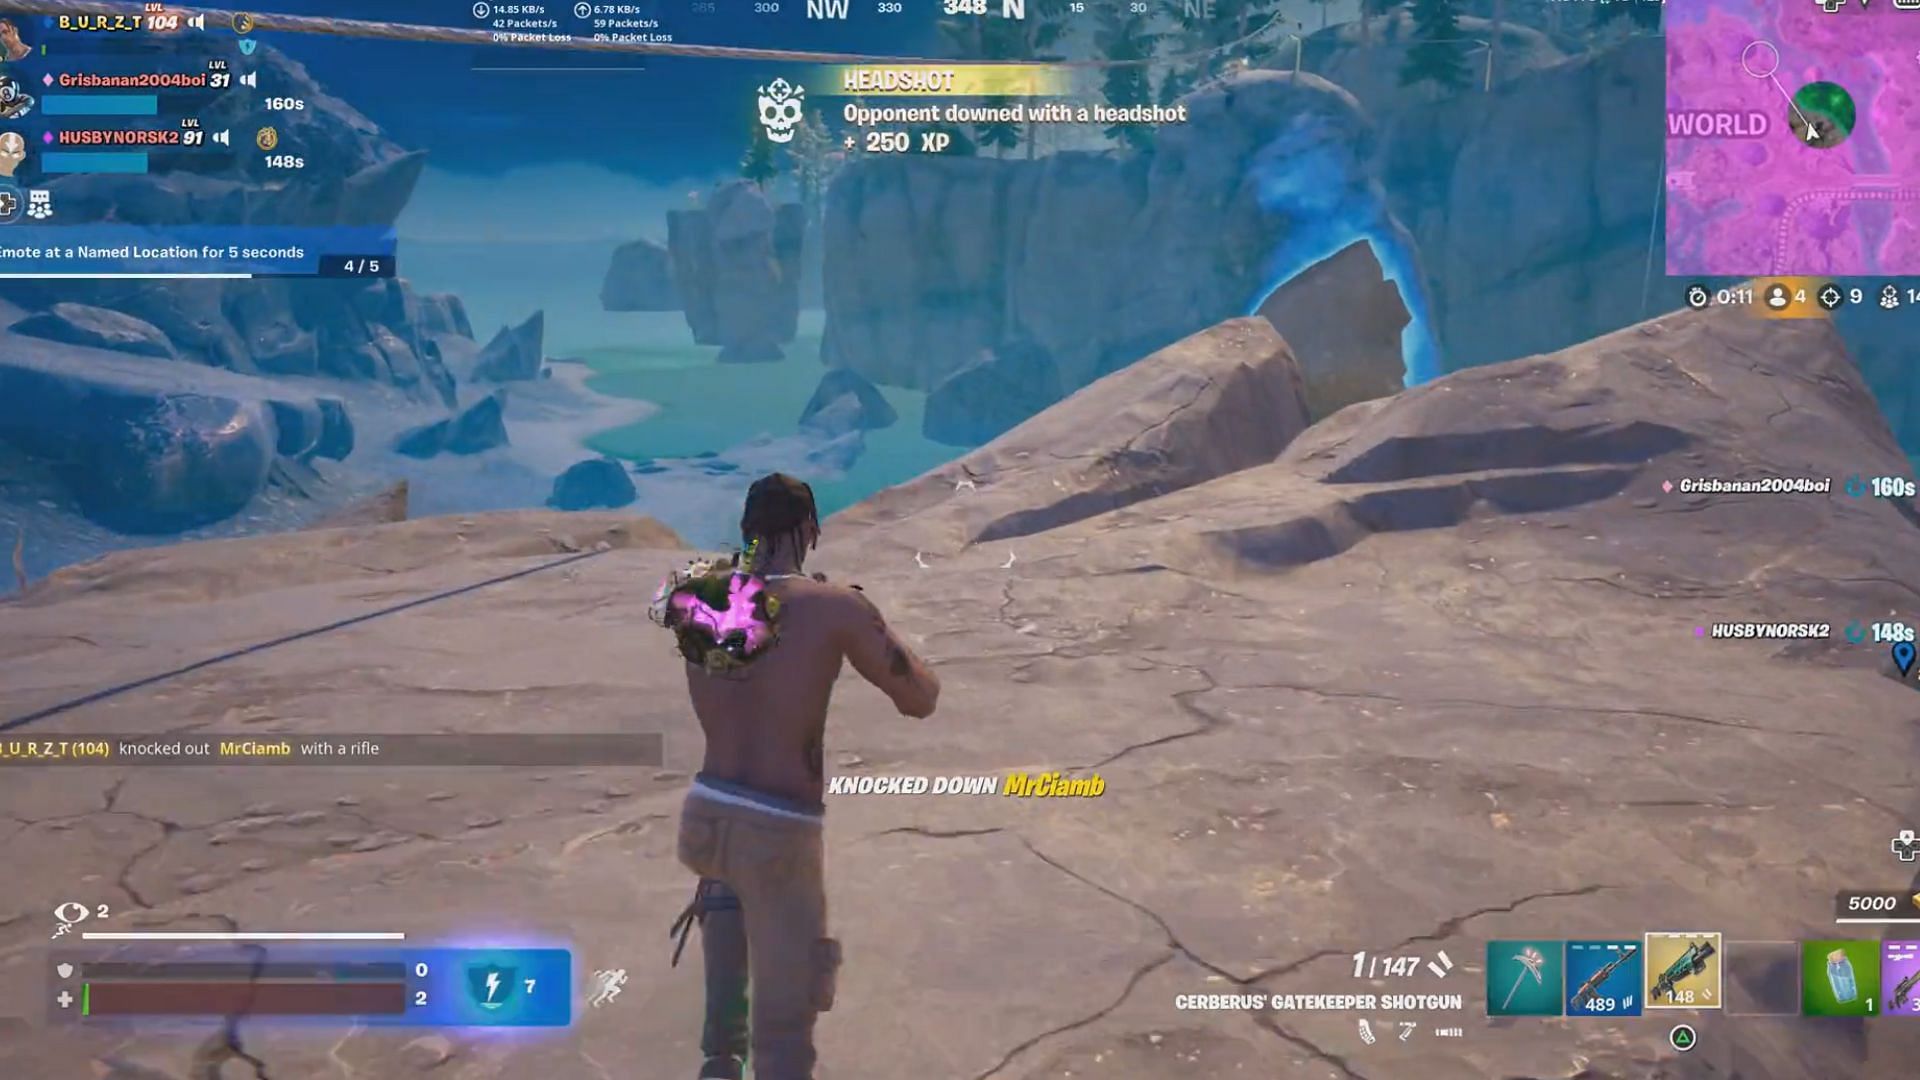 &ldquo;No skill issue&rdquo;: Fortnite community left in awe by jaw-dropping 2hp Victory Royale